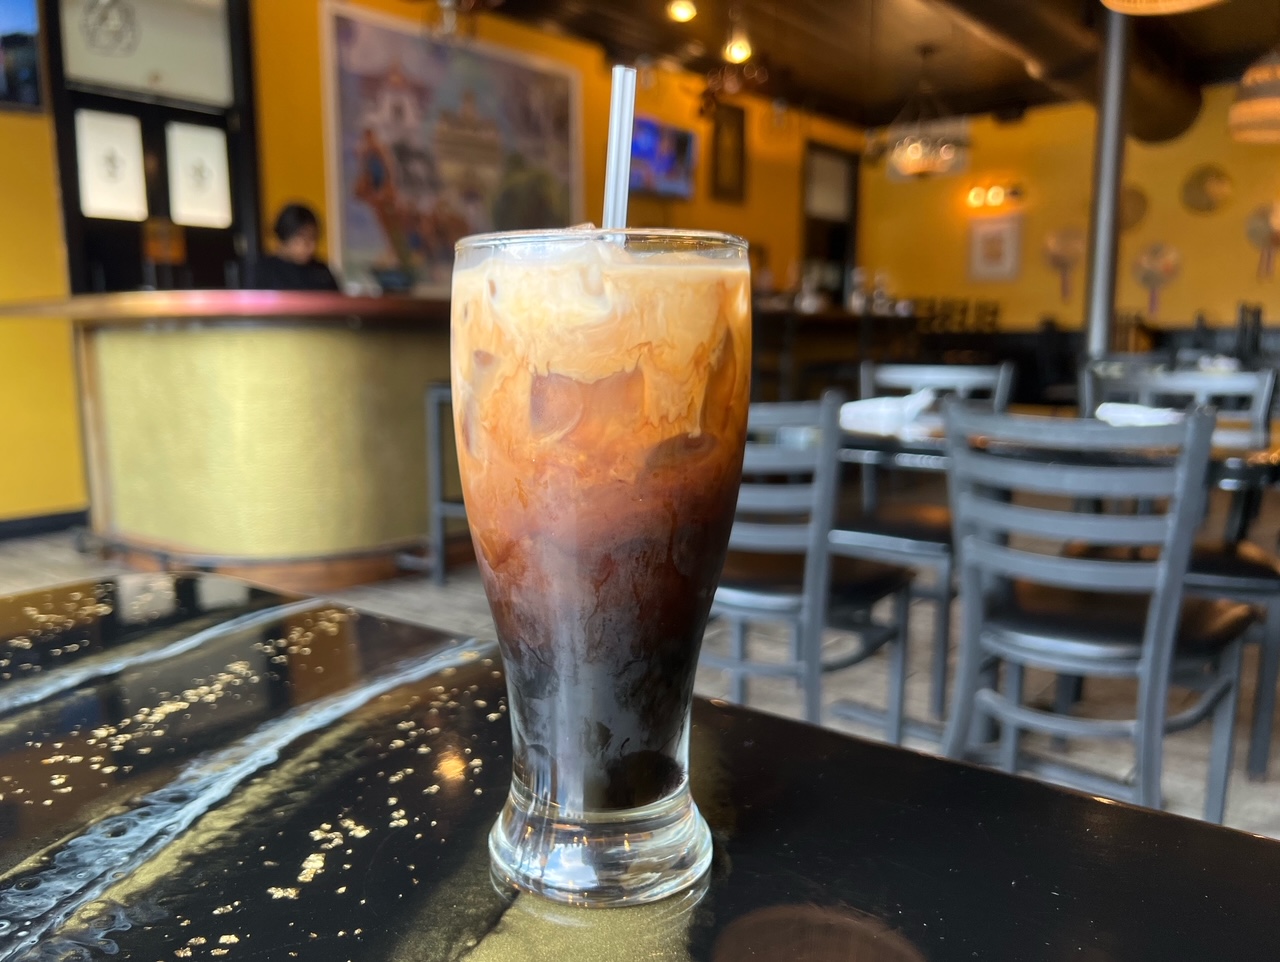 On a black table at Sticky Rice in Champaign, there is a tall glass of Thai iced coffee with swirled milk in the coffee. Photo by Alyssa Buckley.